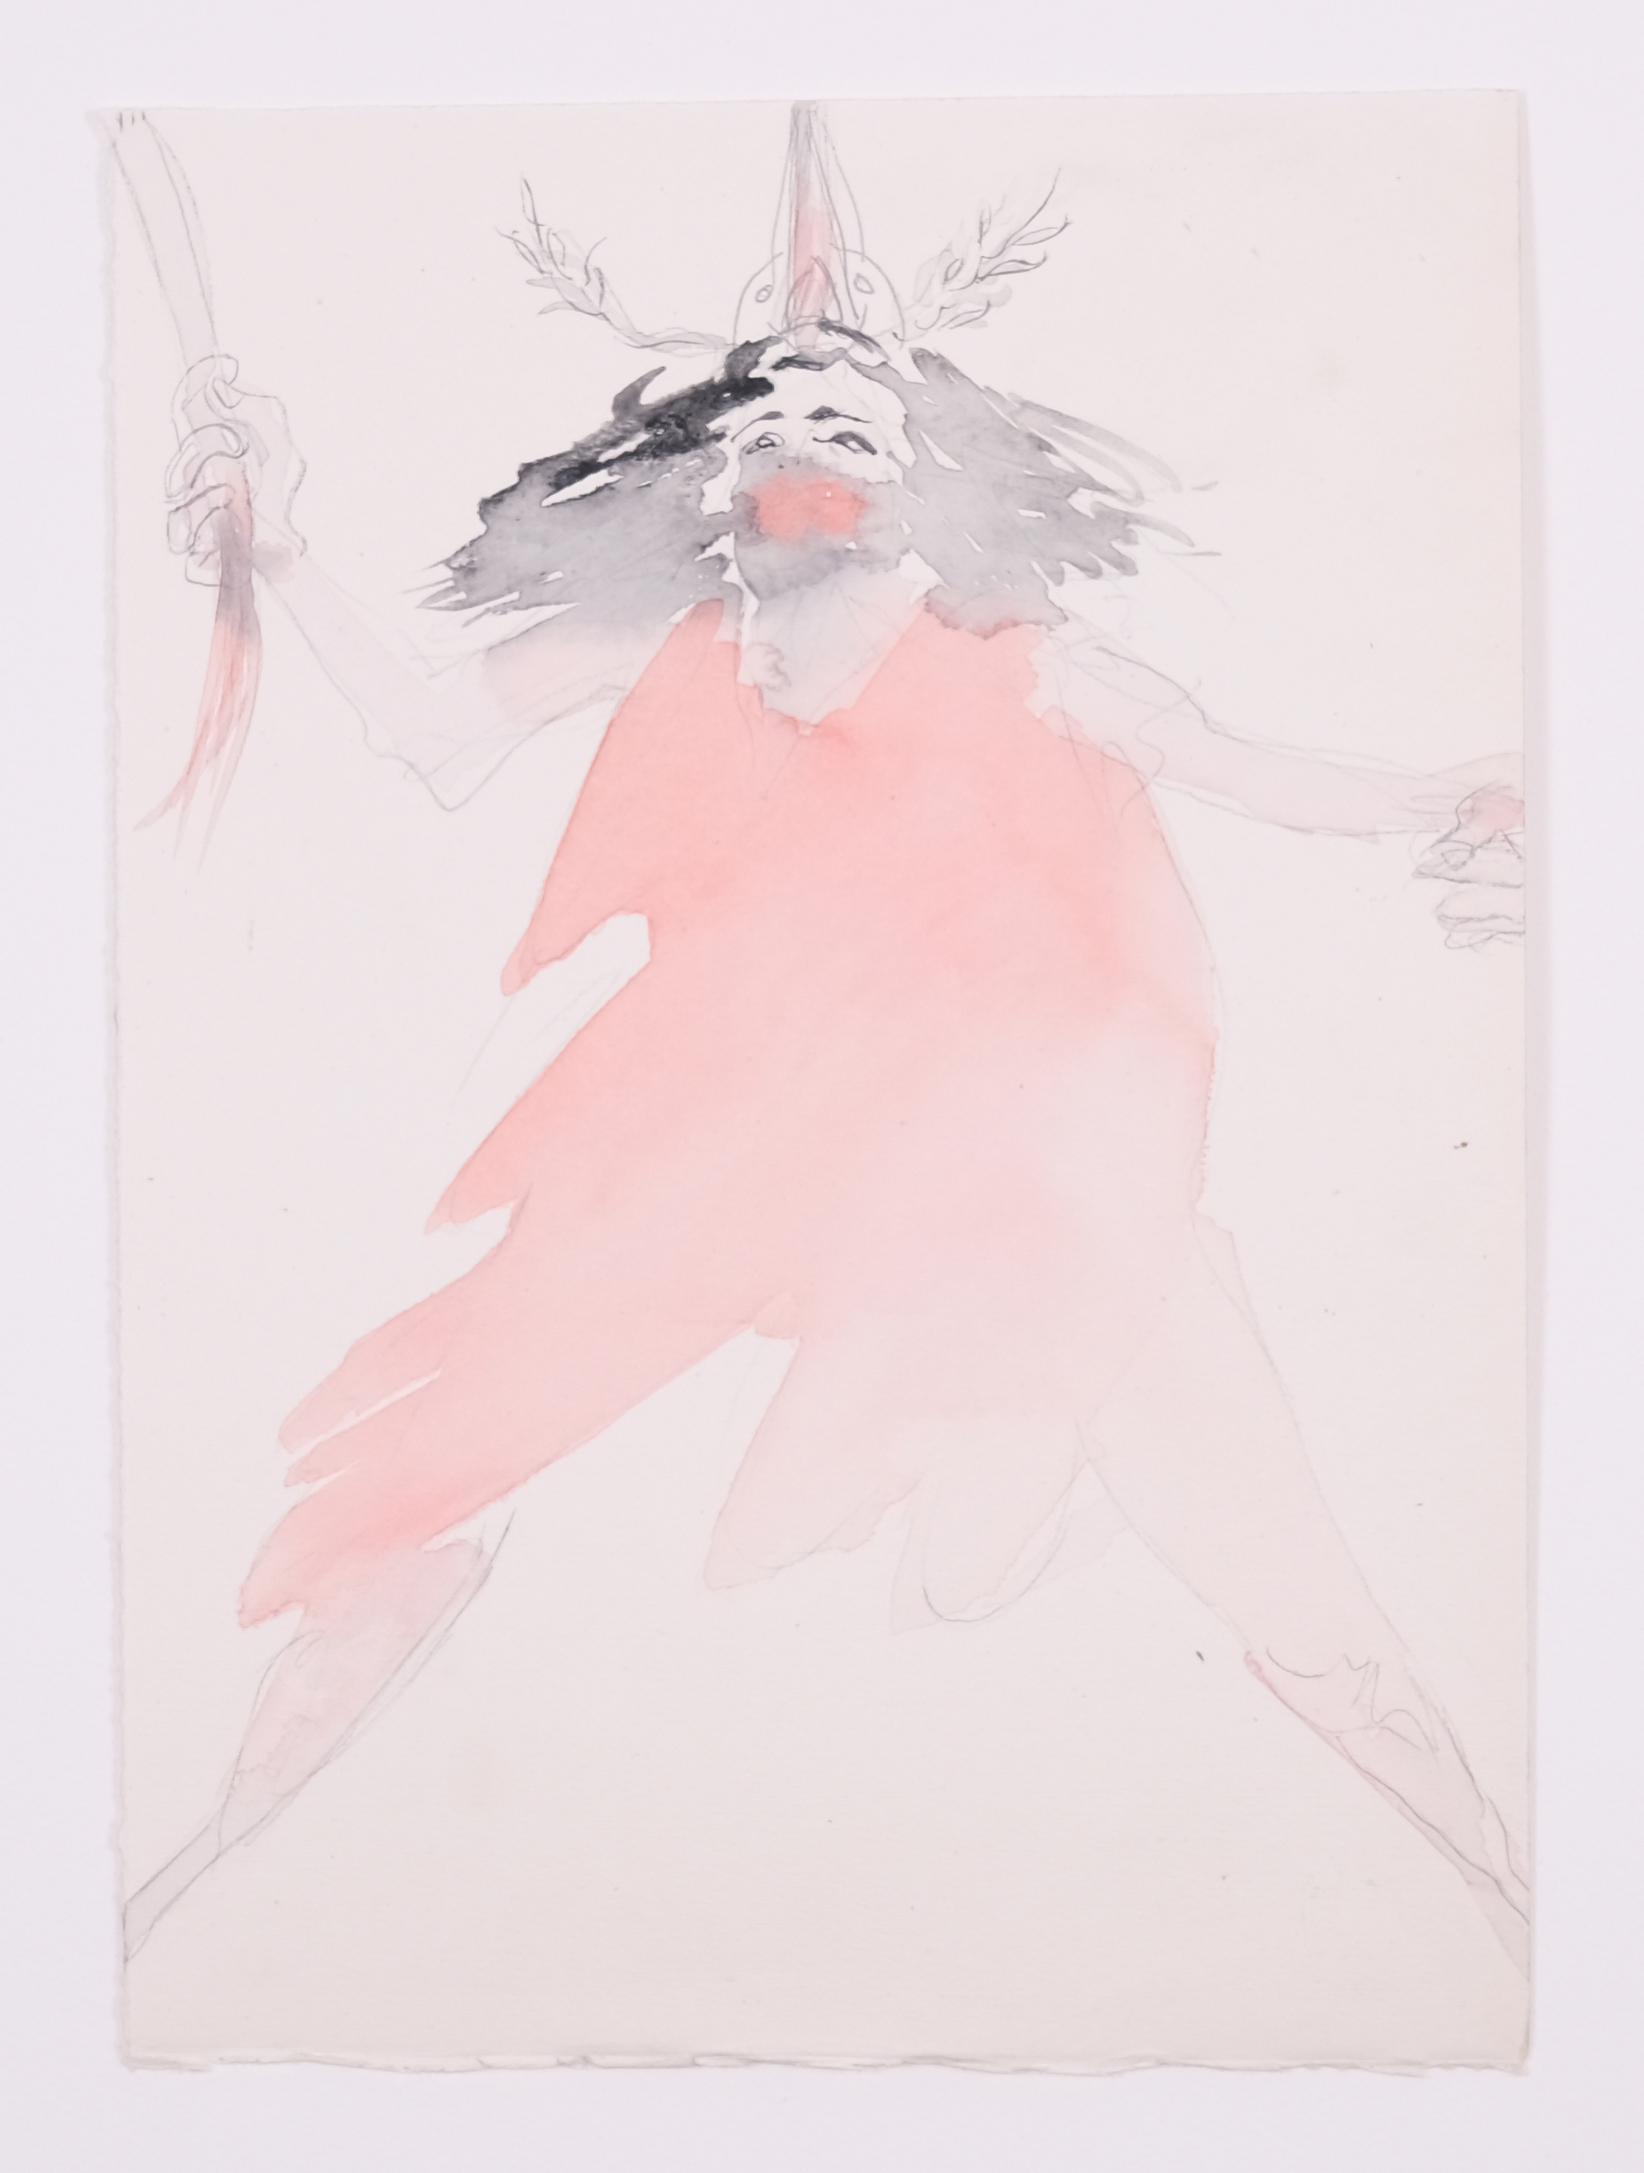 Image: Alina Bliumis, Dance as a Weapon (Studies in Movement Across National Ideologies of War and Resistance), series of watercolor on paper, 2020